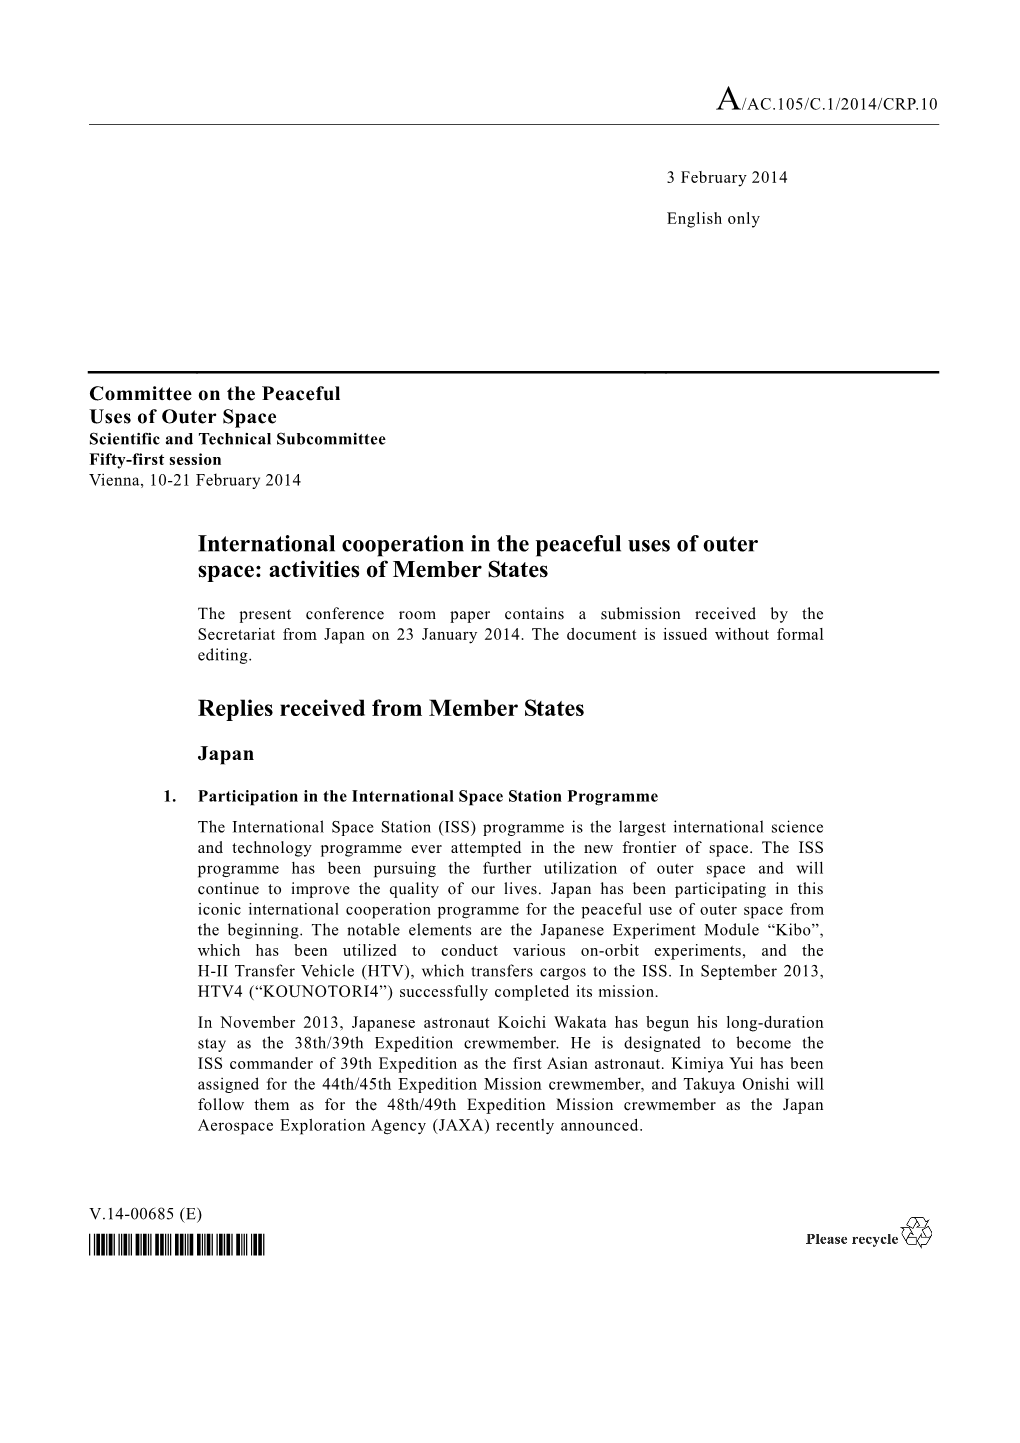 International Cooperation in the Peaceful Uses of Outer Space: Activities of Member States